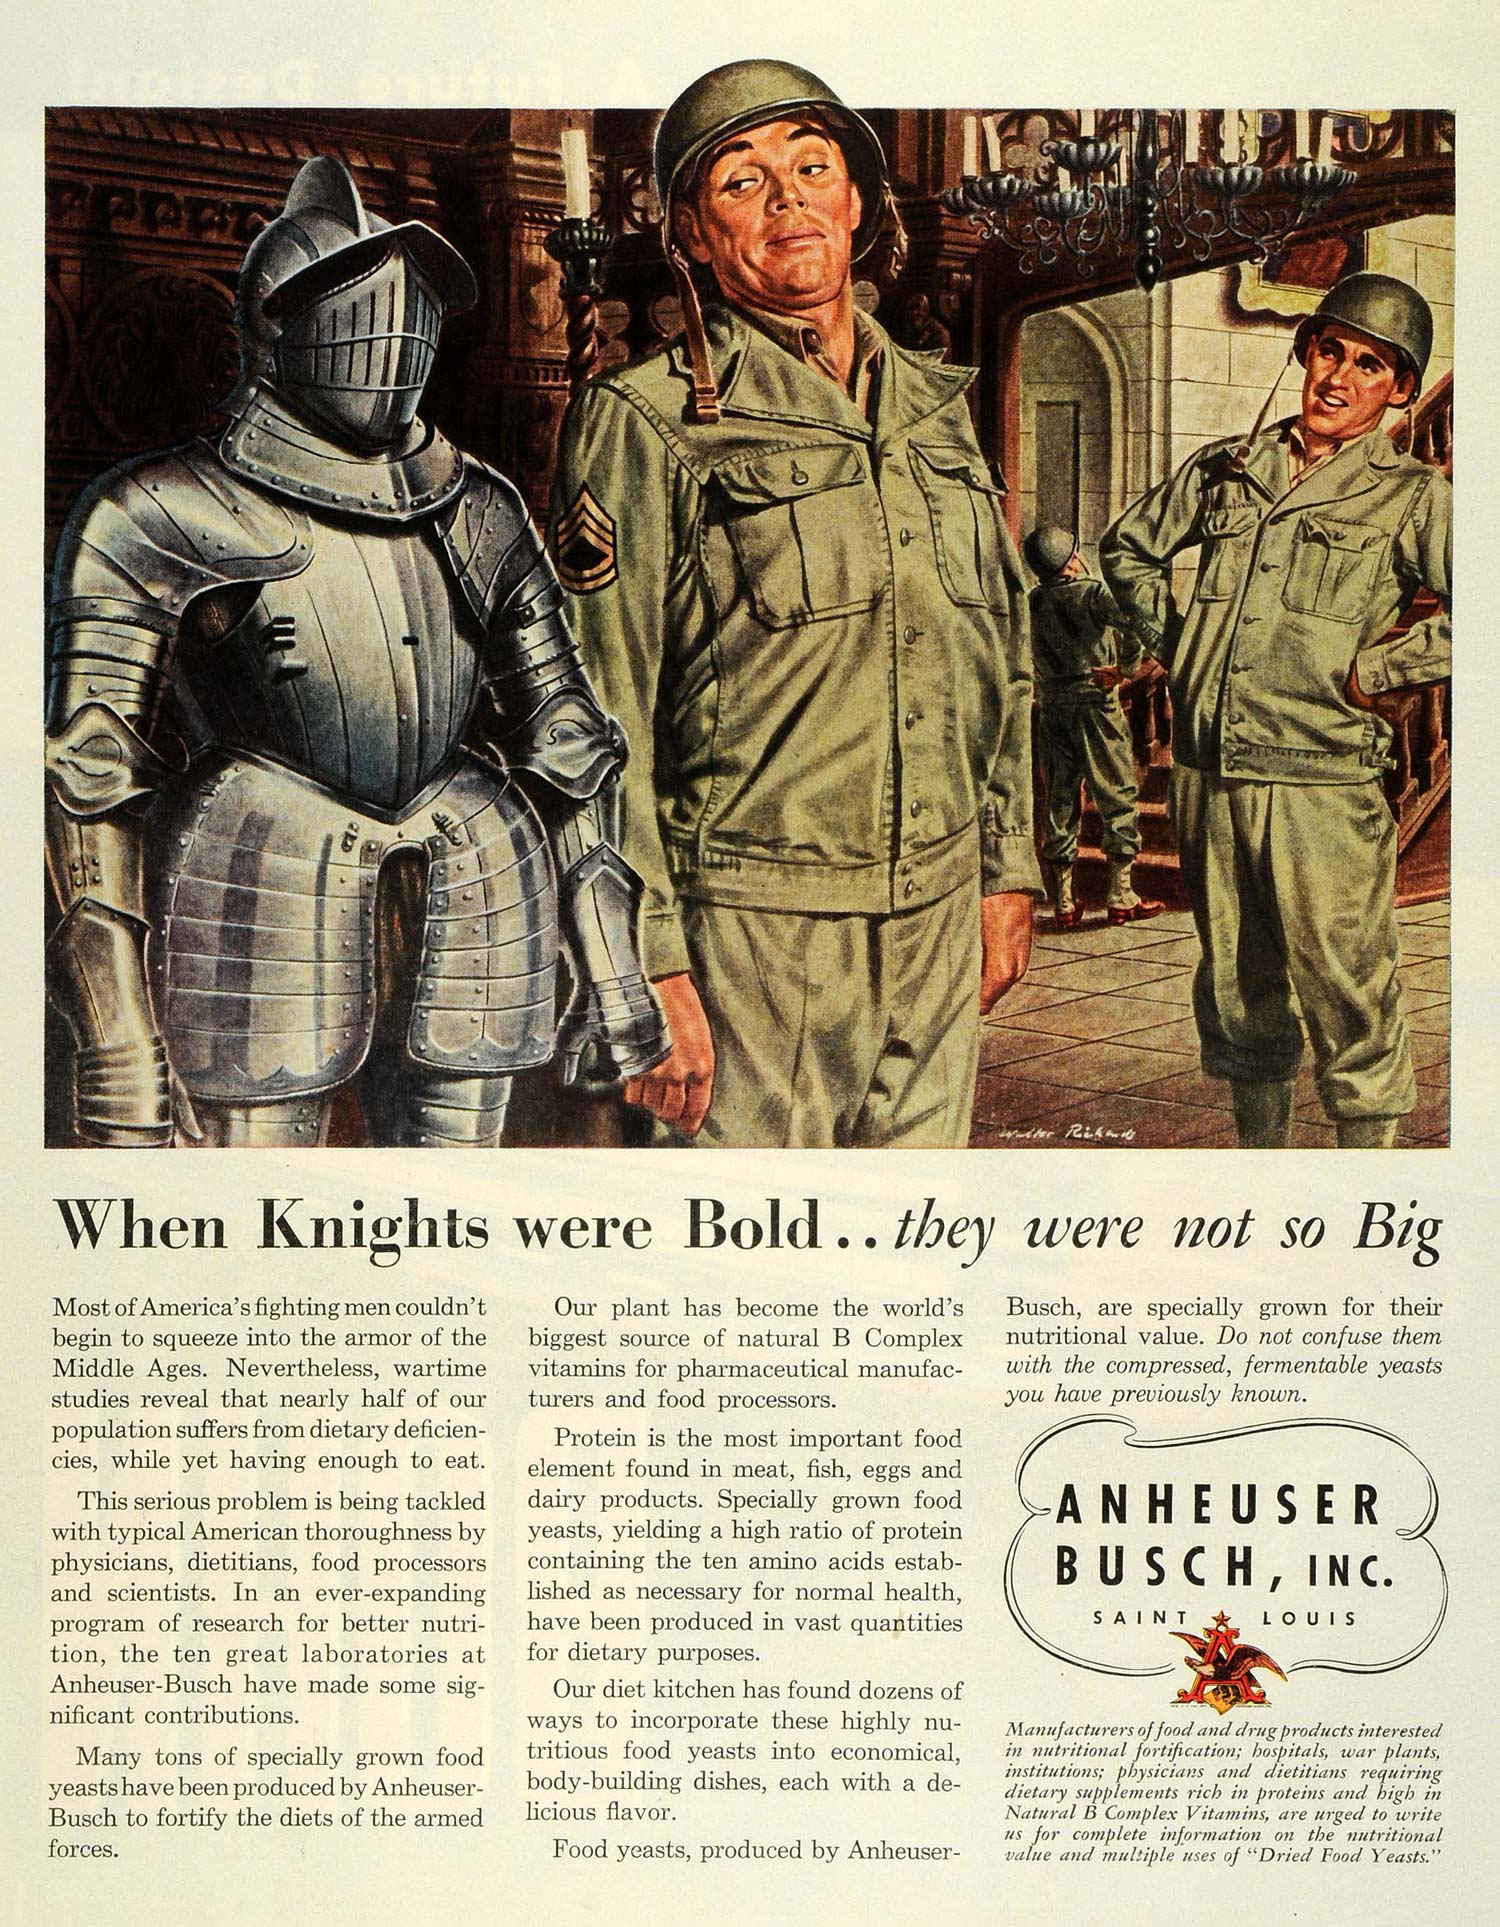 1945 Ad Anheuser Busch Inc Knight Warrior Armor Soldier Food Drug Products FZ8